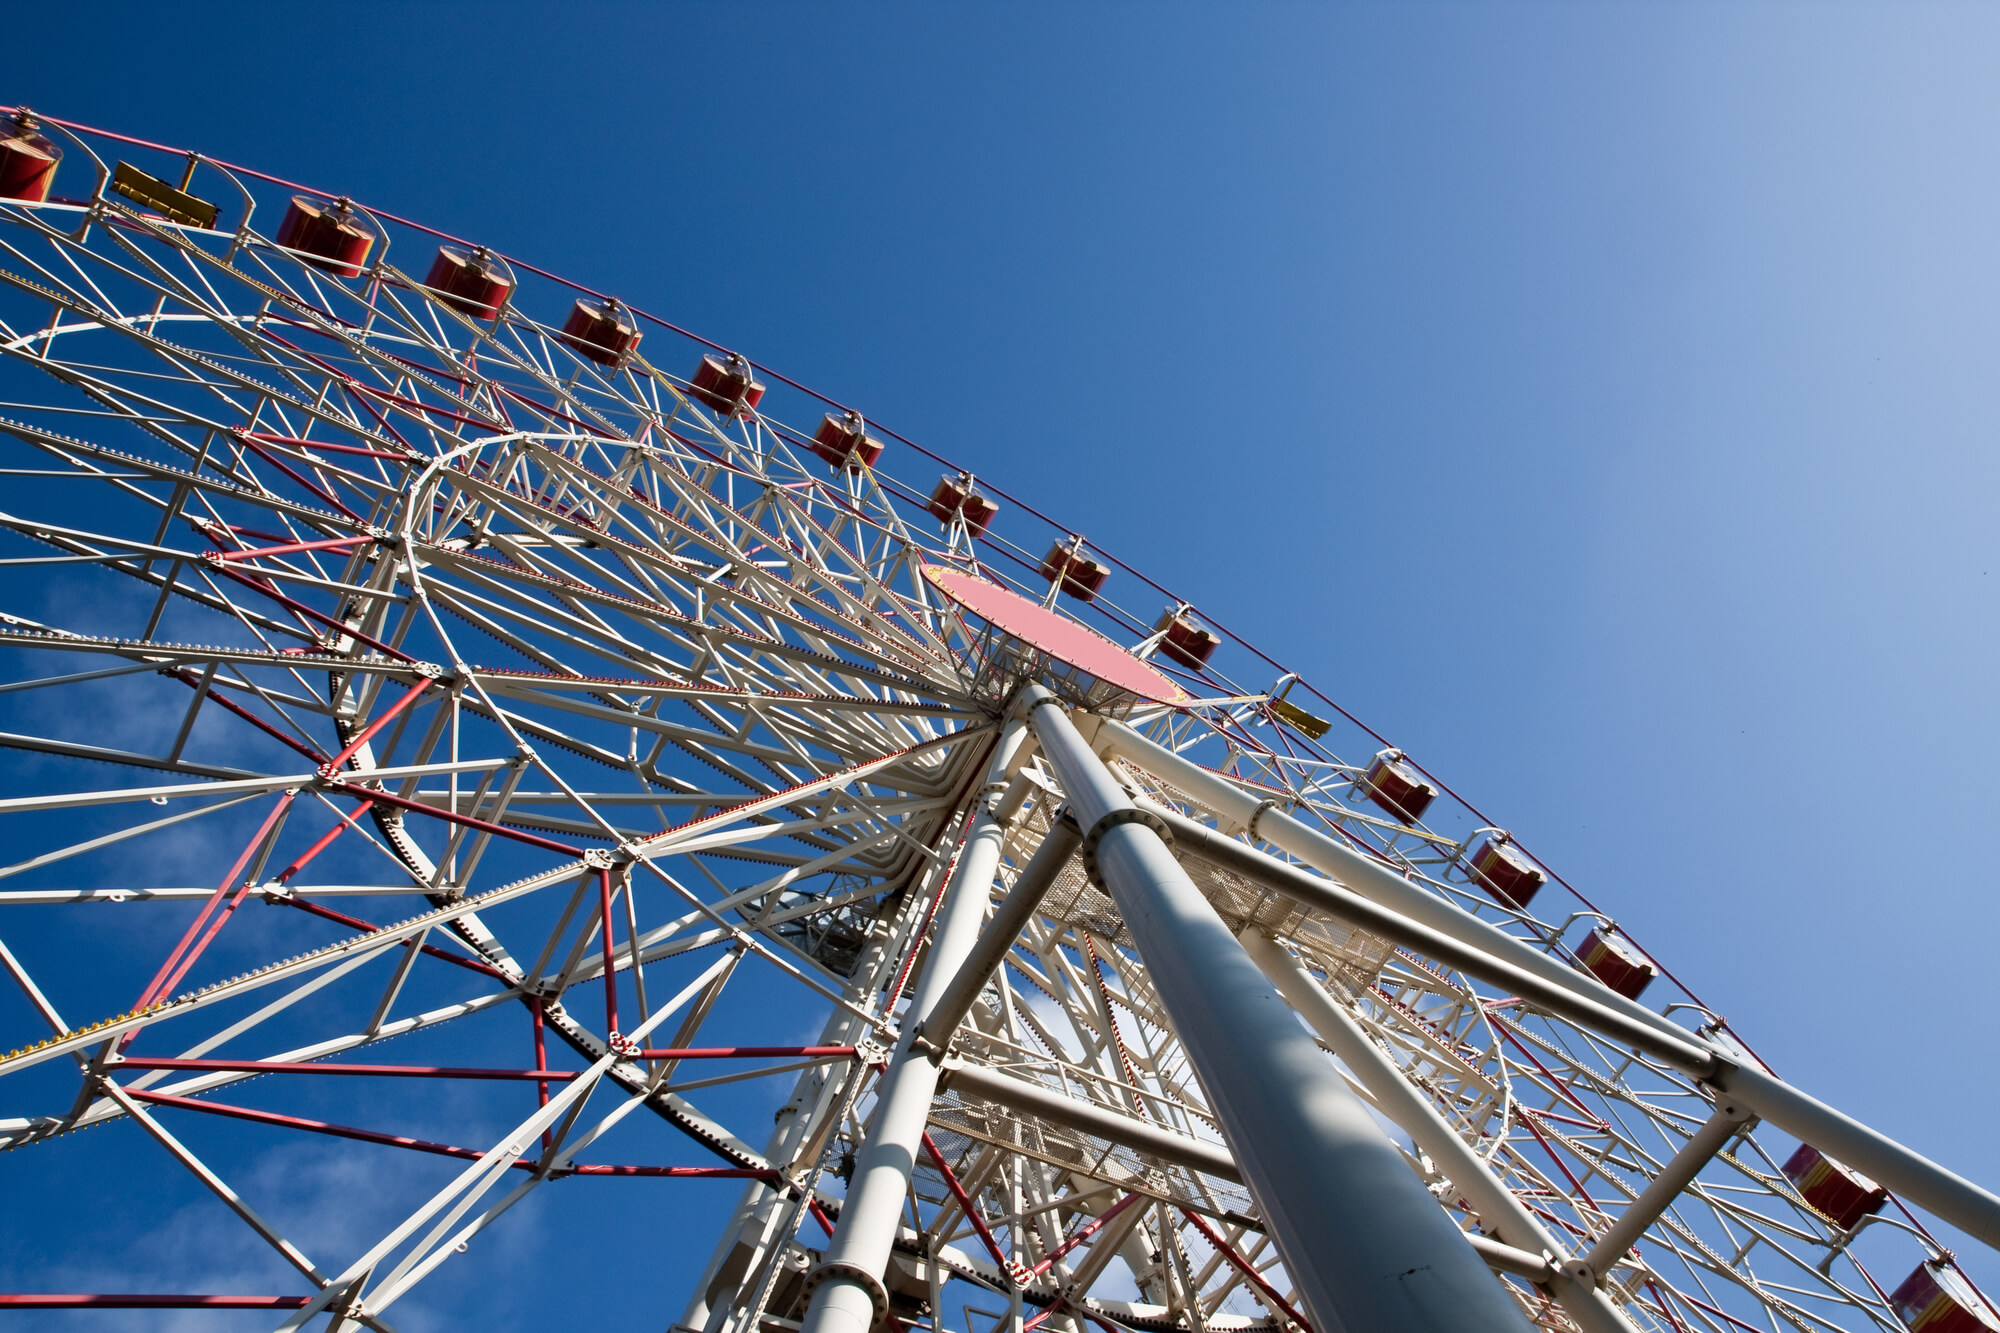 NATIONAL FERRIS WHEEL DAY - February 14, 2025 - National Today